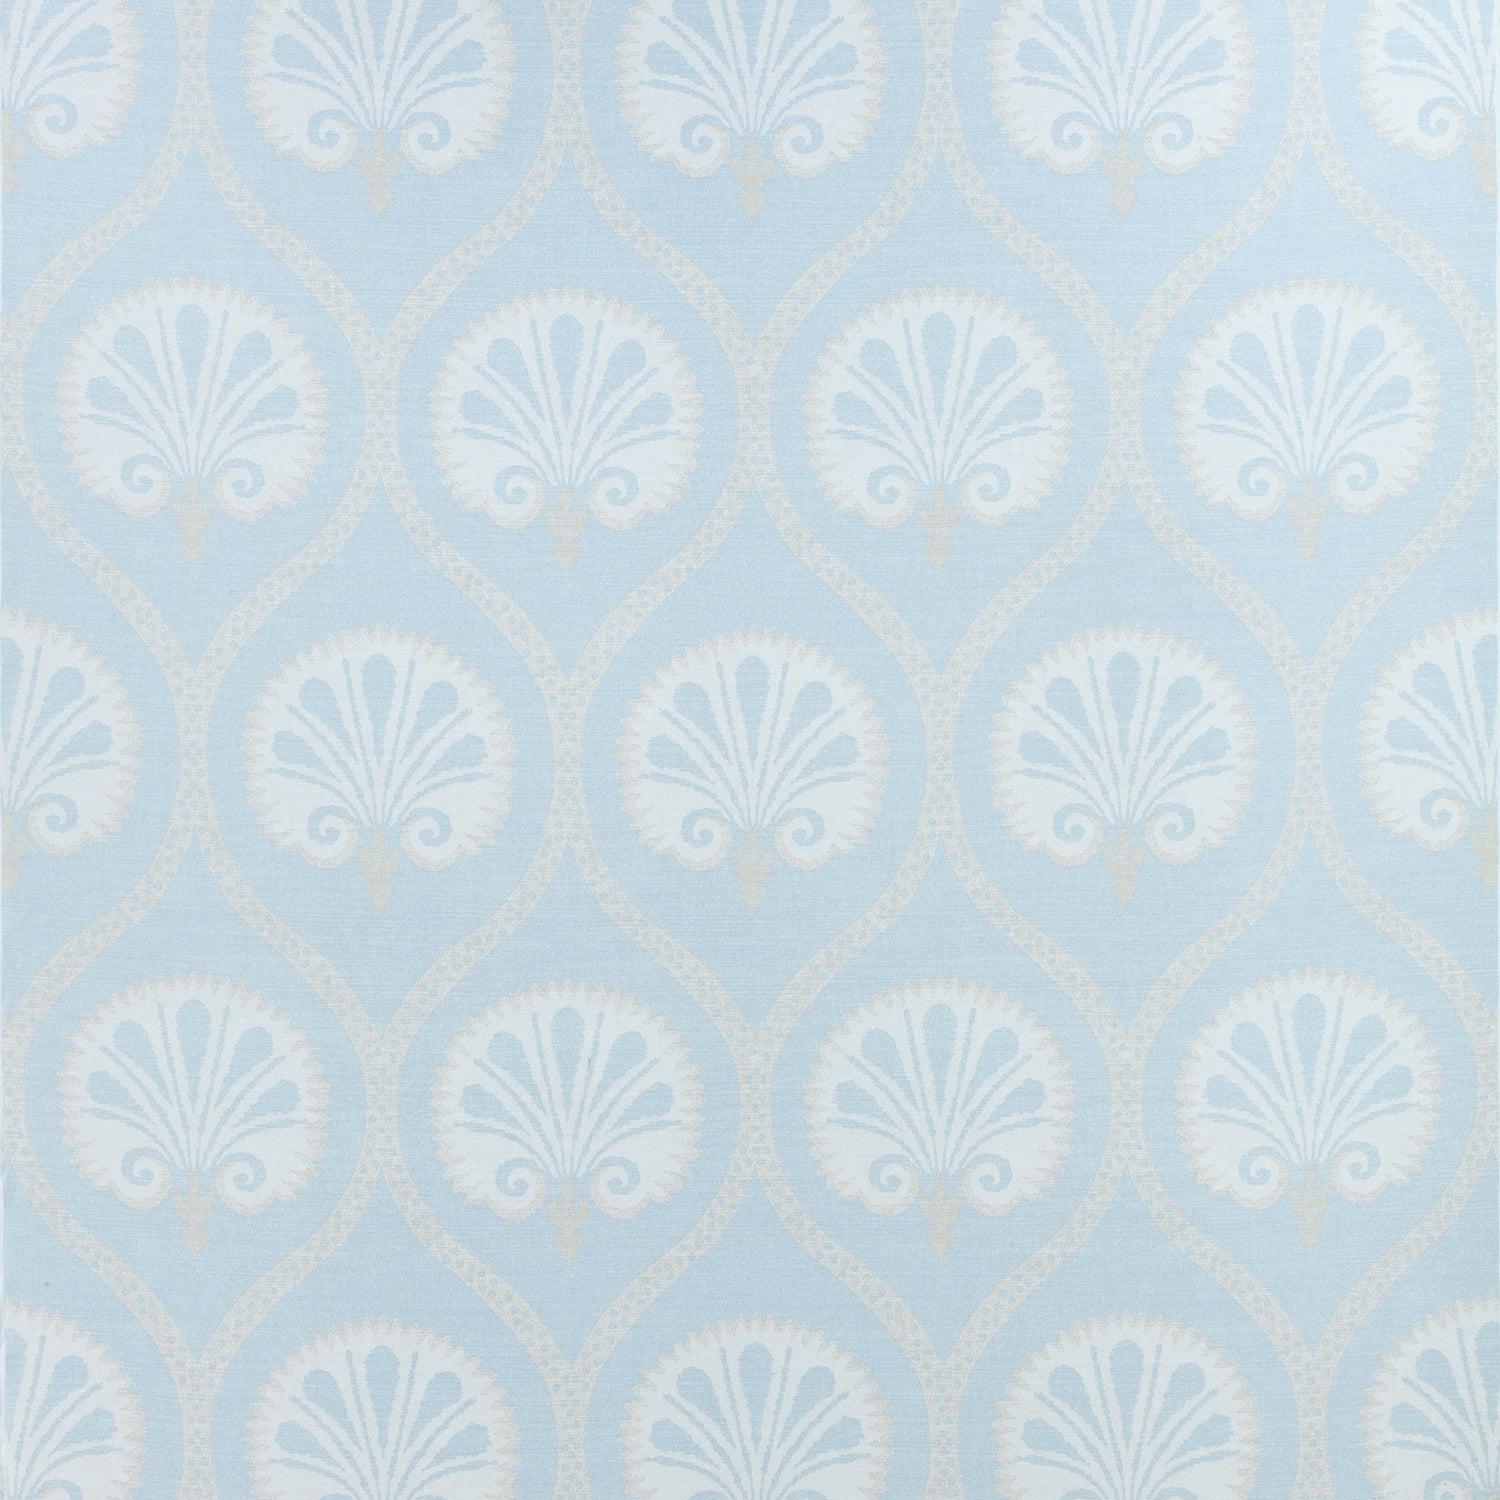 Kimberly fabric in aqua color - pattern number F985017 - by Thibaut in the Greenwood collection